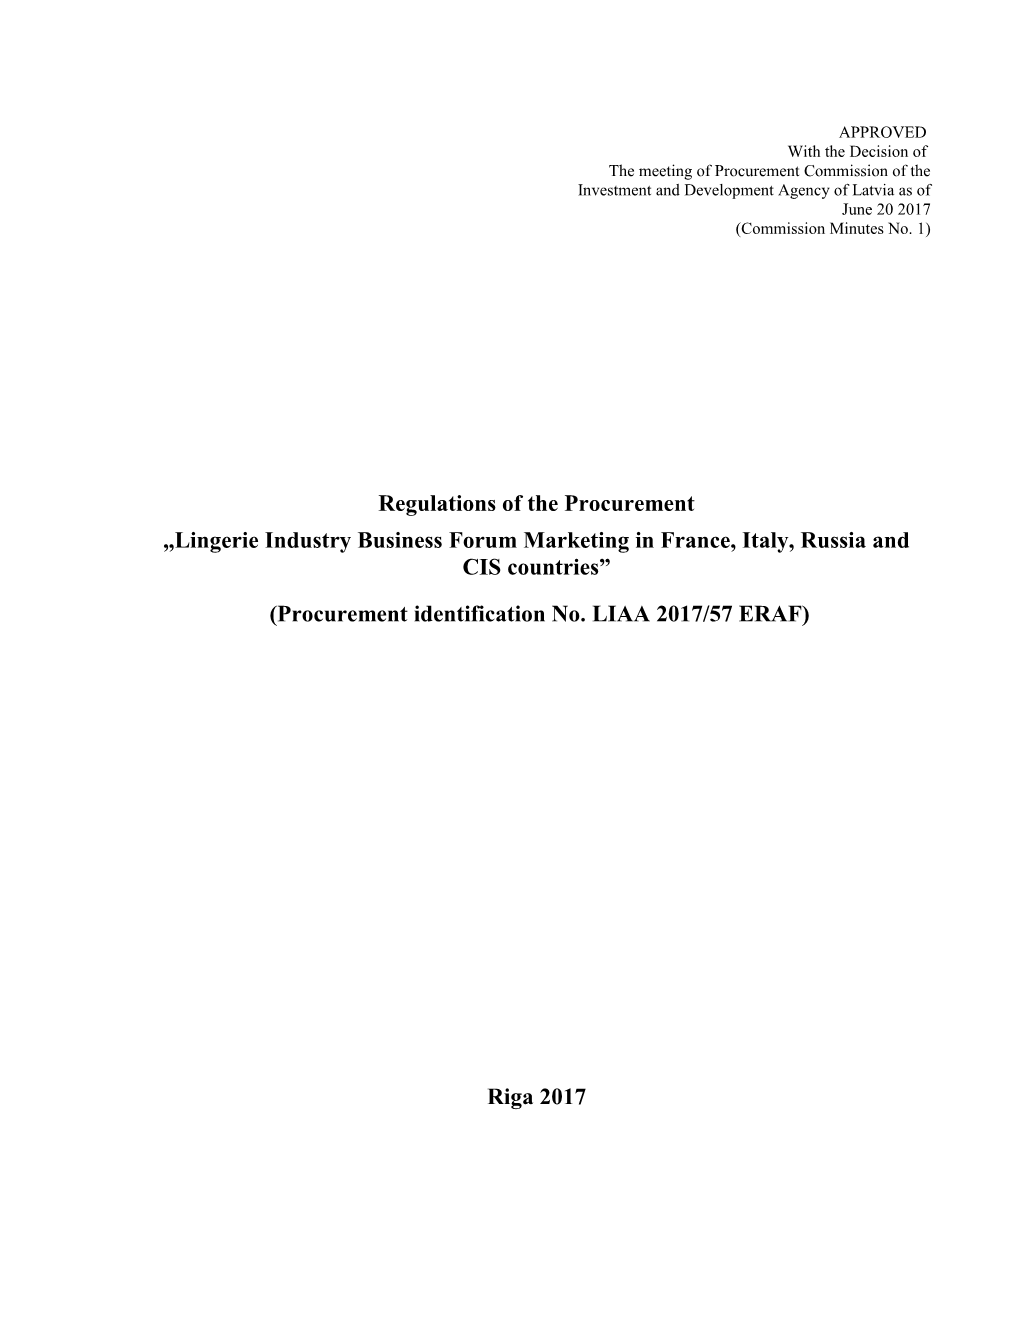 The Meeting of Procurement Commission of The